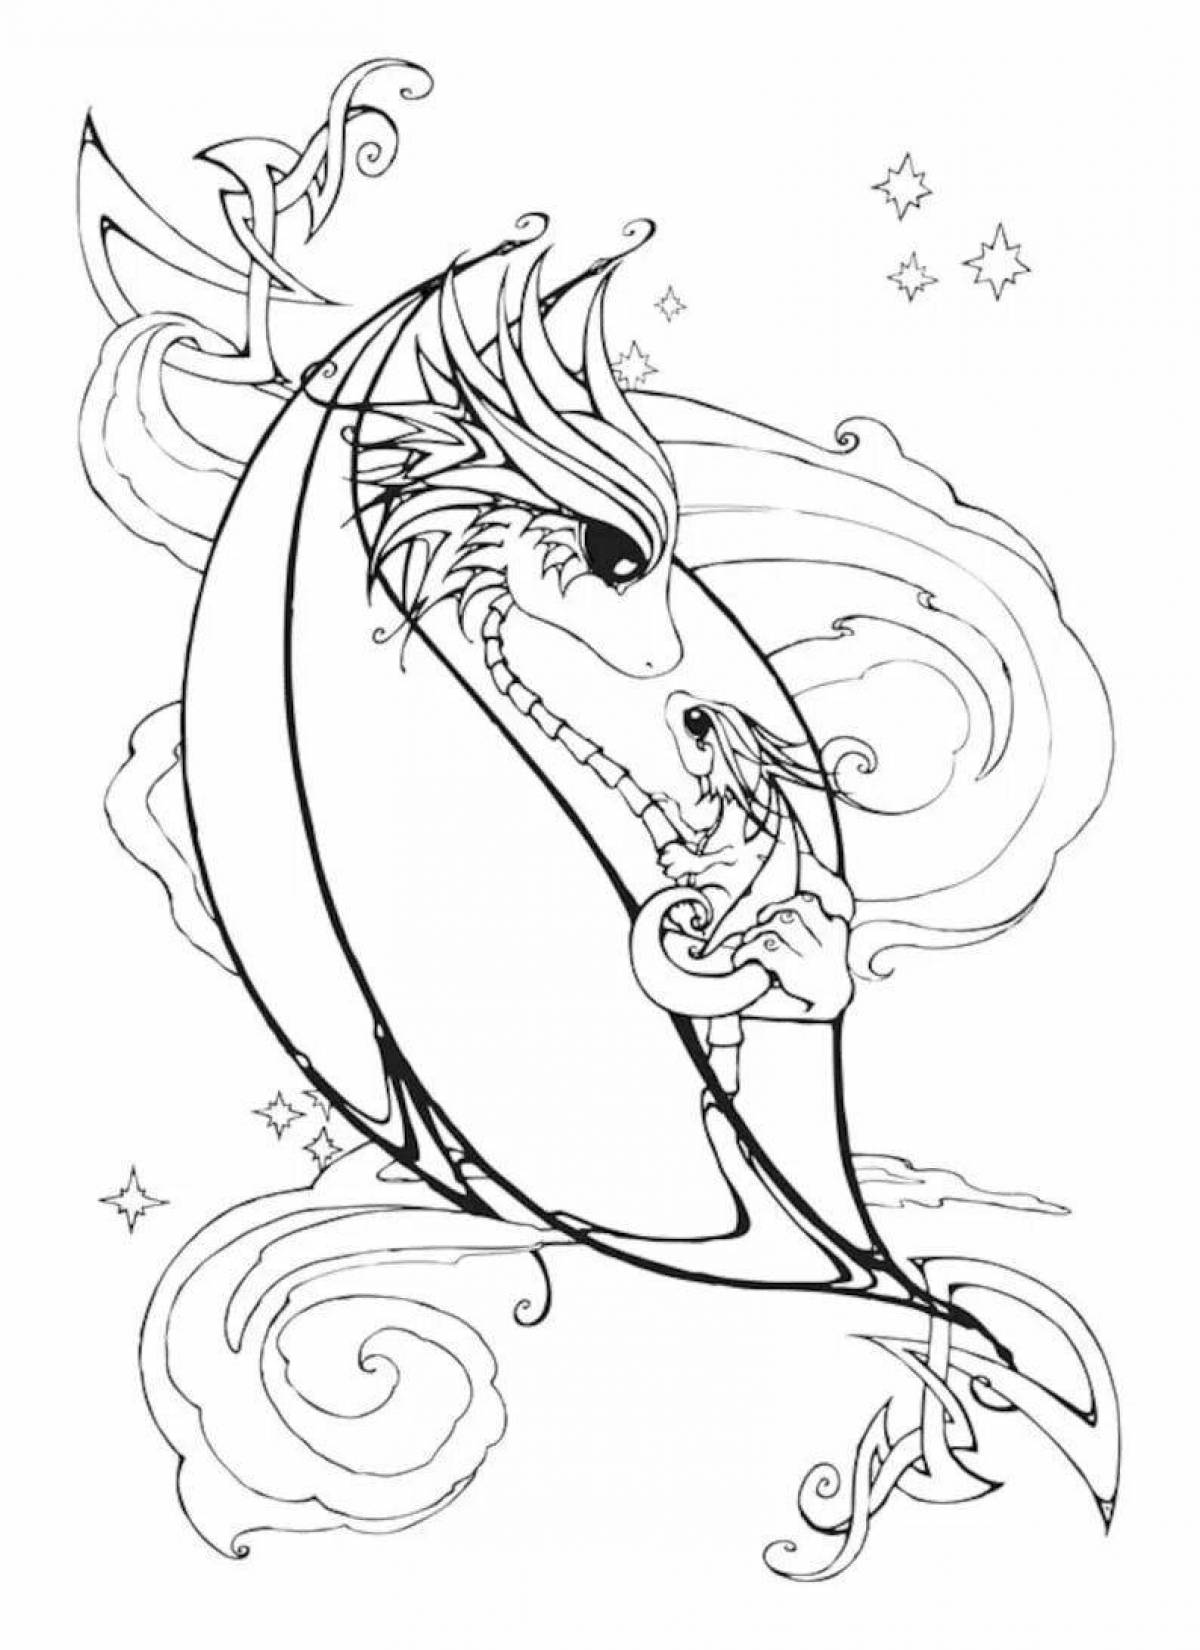 Sparkling cute dragon coloring page